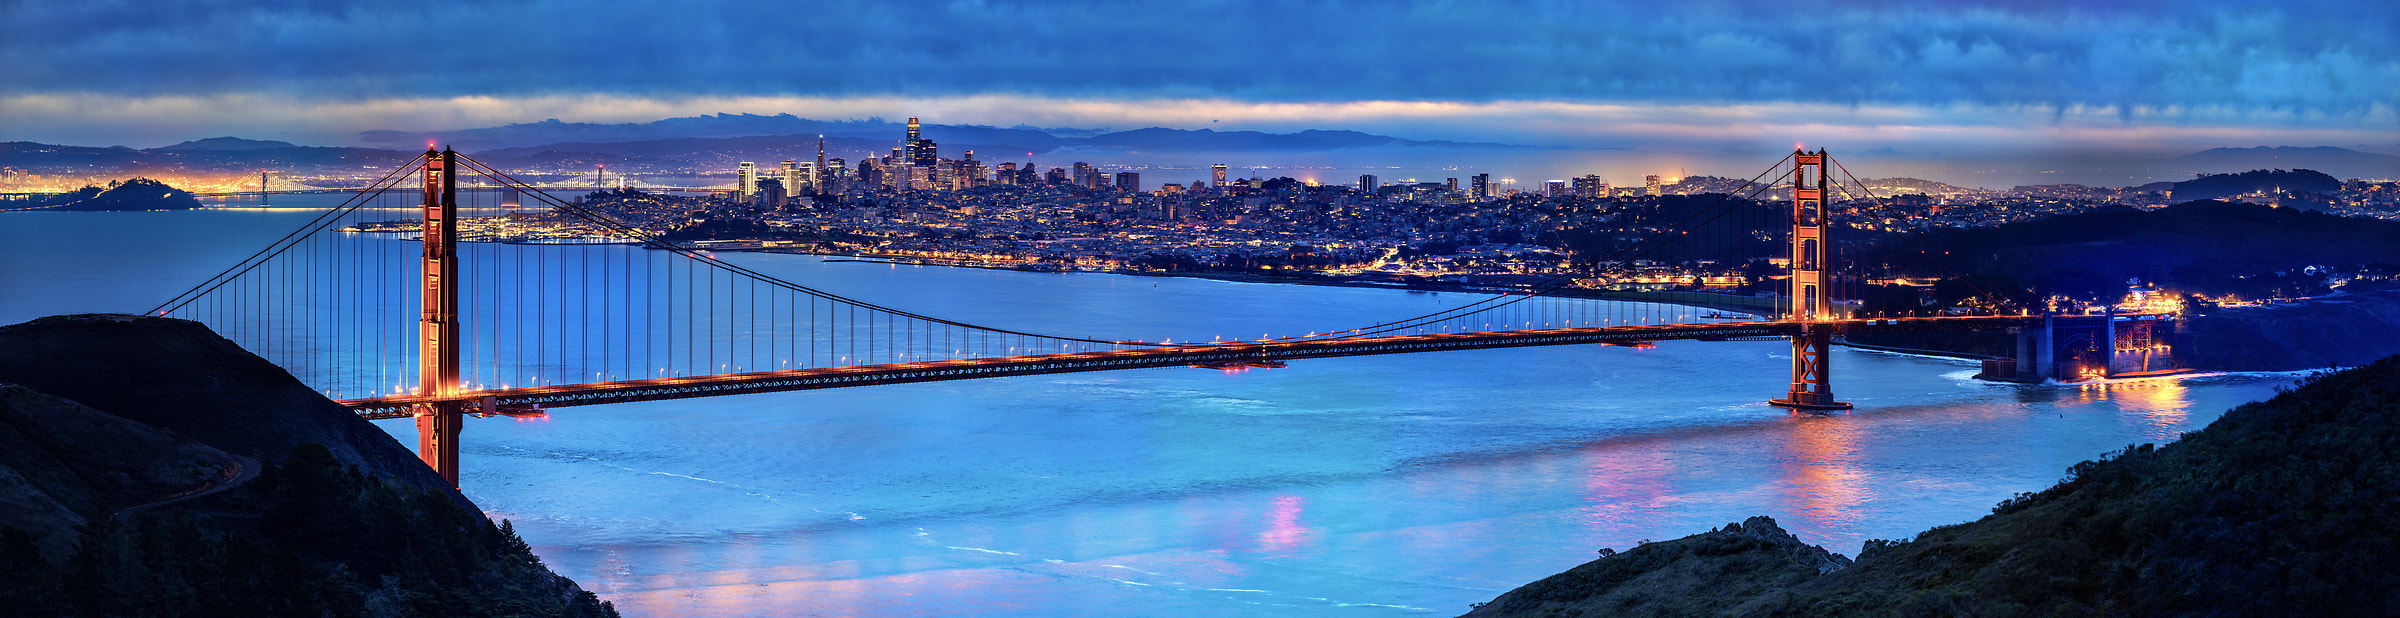 1,544 megapixels! A very high resolution, large-format VAST photo print of the Golden Gate Bridge and San Francisco; cityscape photograph created by Nicholas Gonzales in Marin Headlands, Sausalito, California.